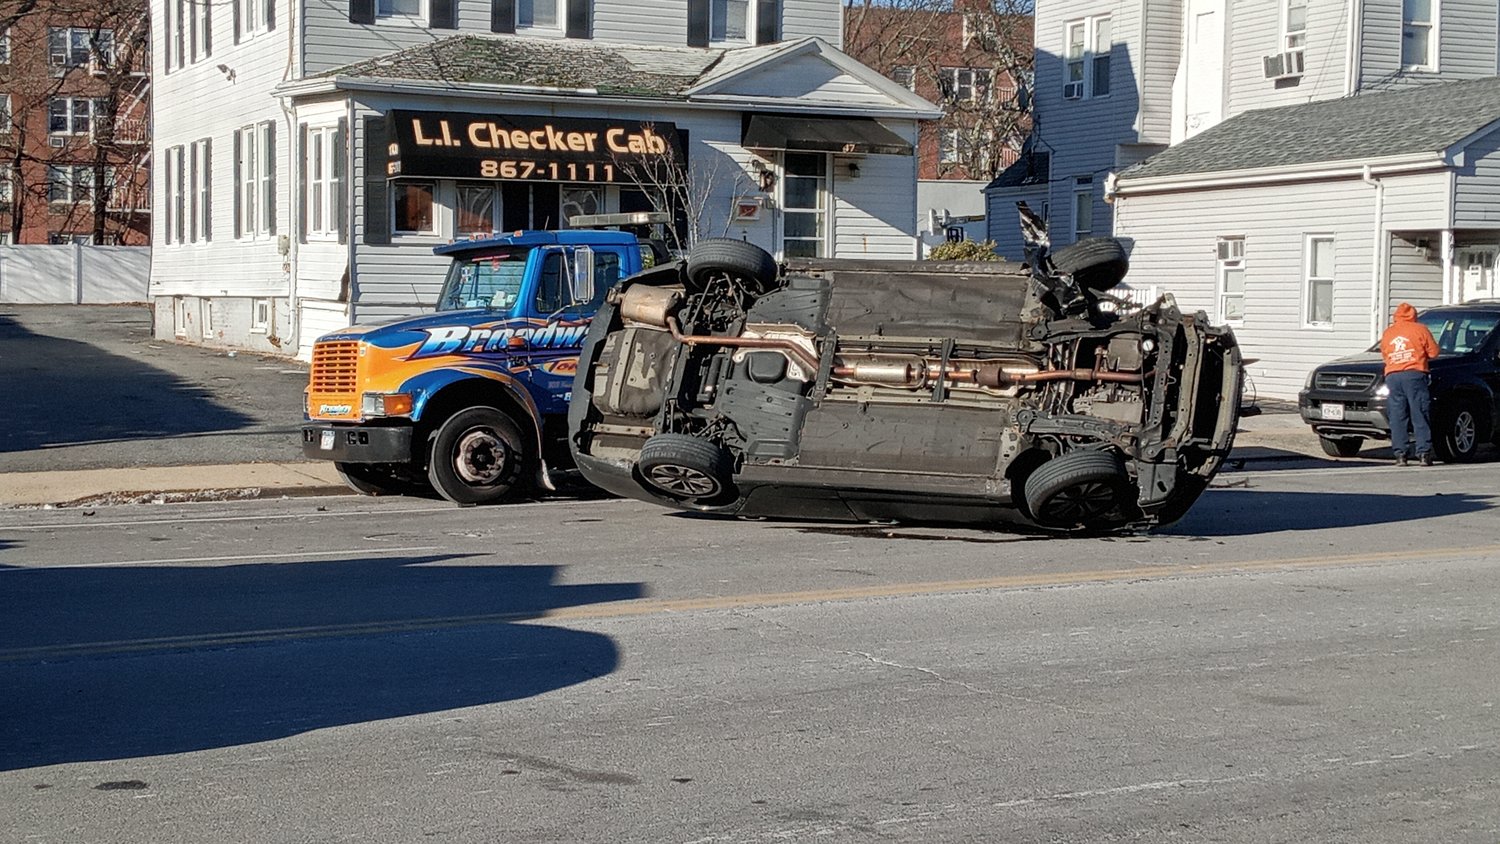 An SUV overturned on Saturday morning in Freeport.